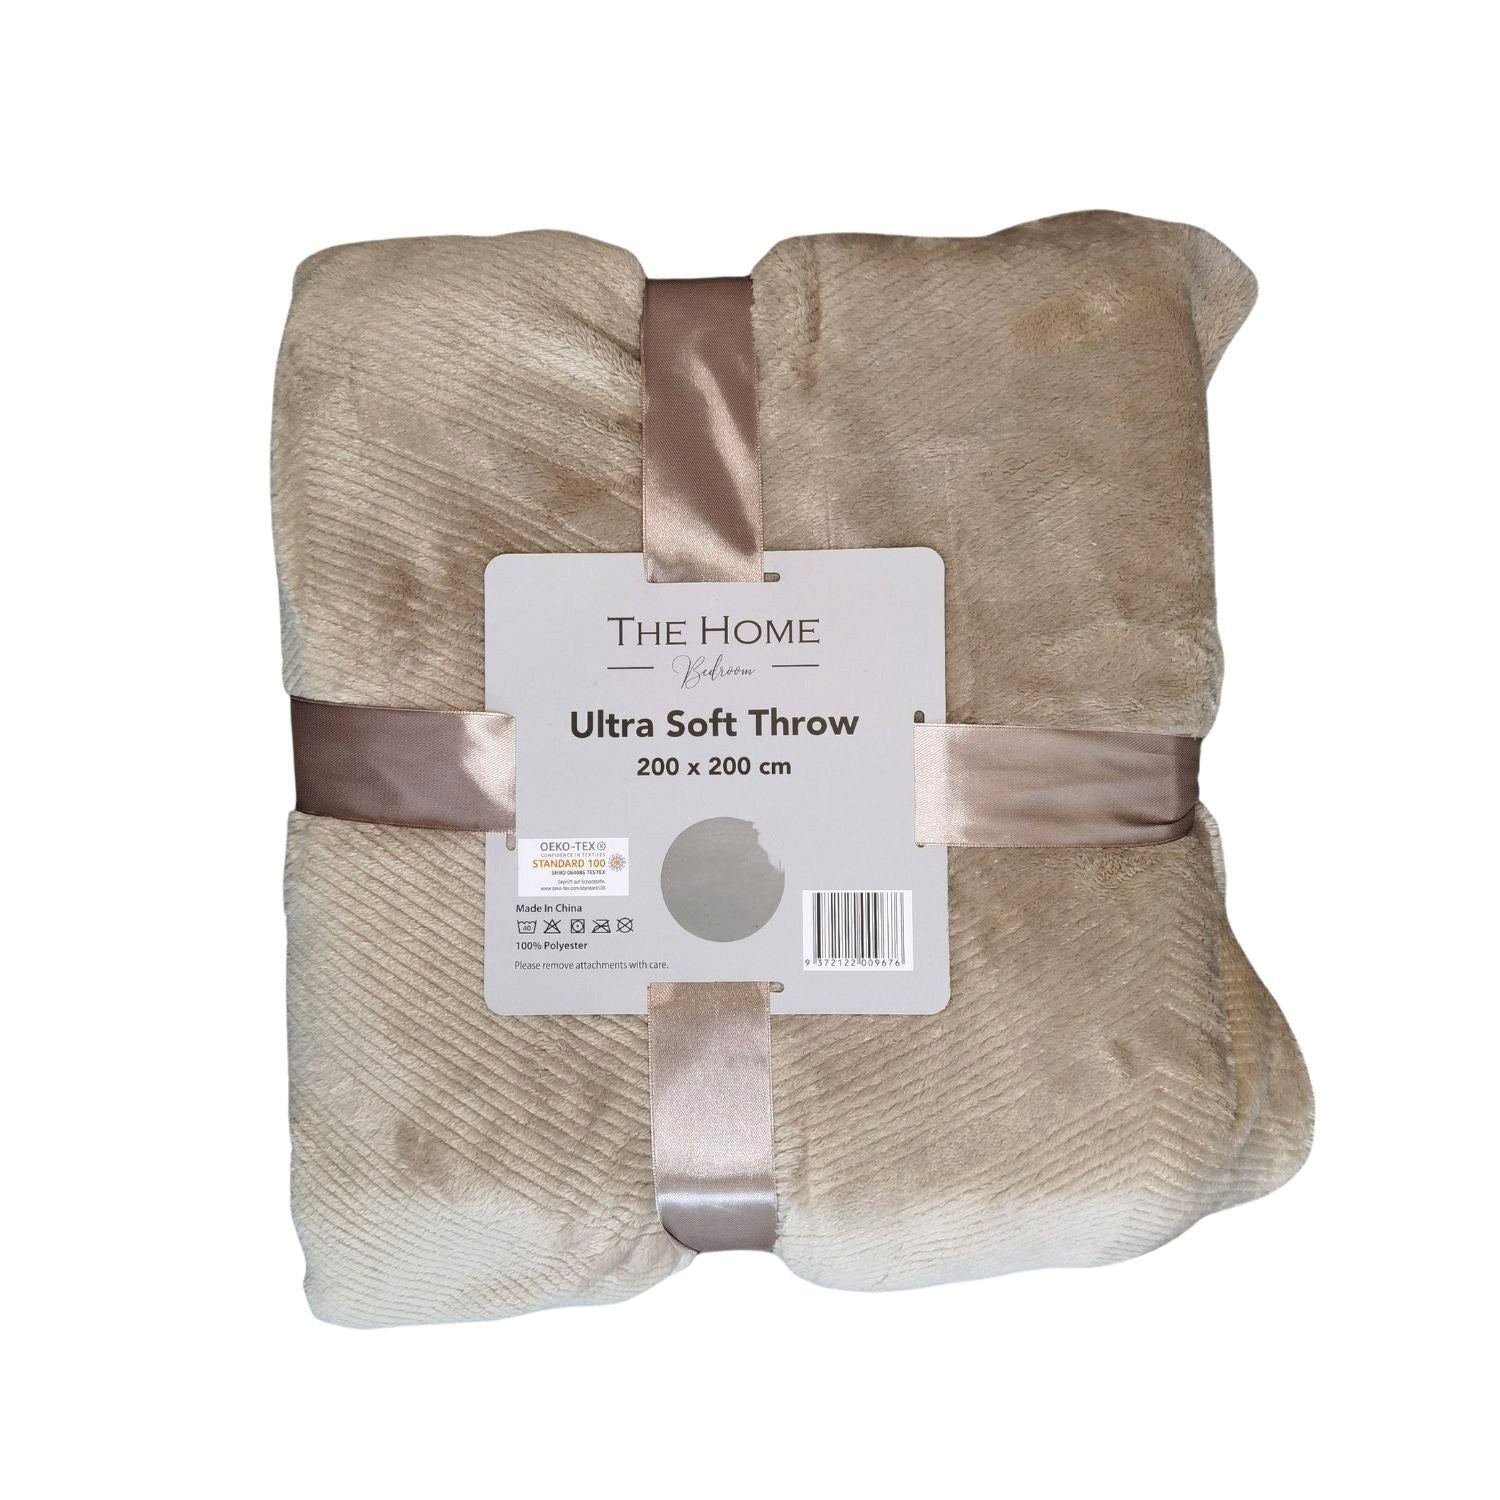 The Home Bedroom Ultra Soft Throw - Beige 1 Shaws Department Stores